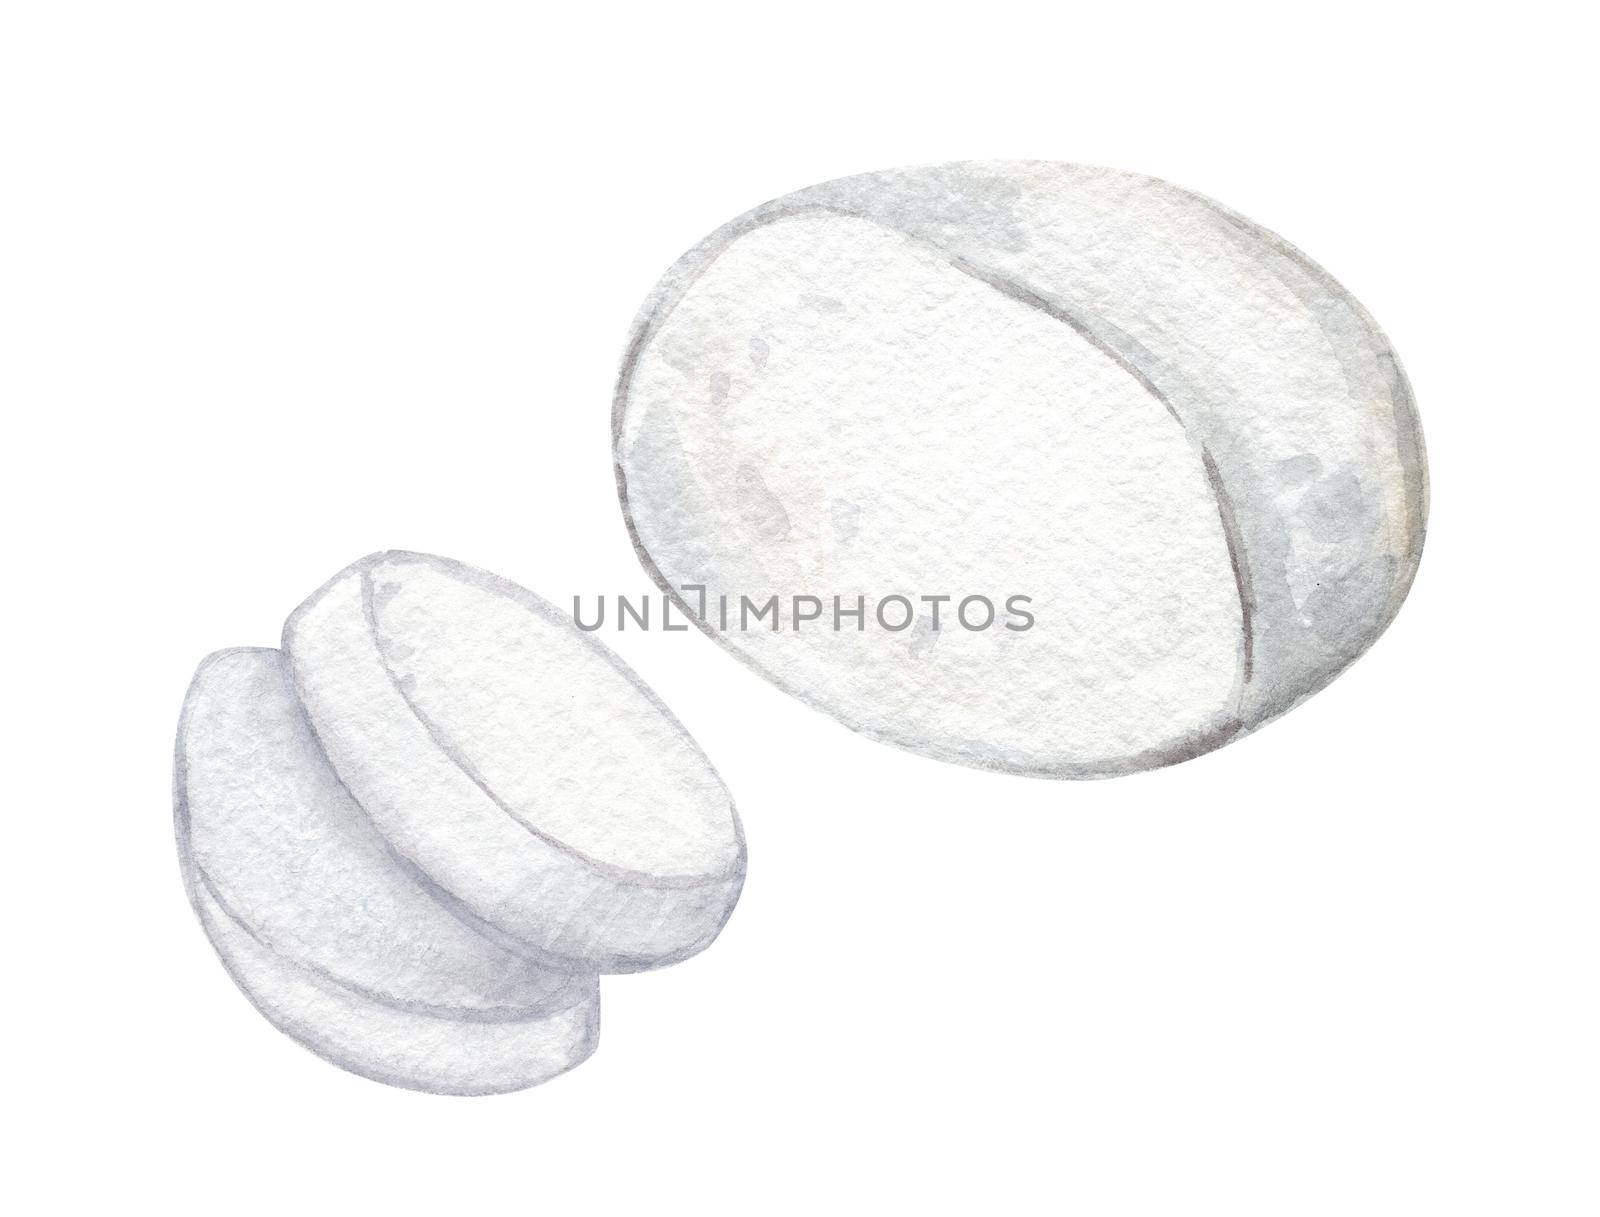 Watercolor mozzarella pieces set isolated on white background by dreamloud